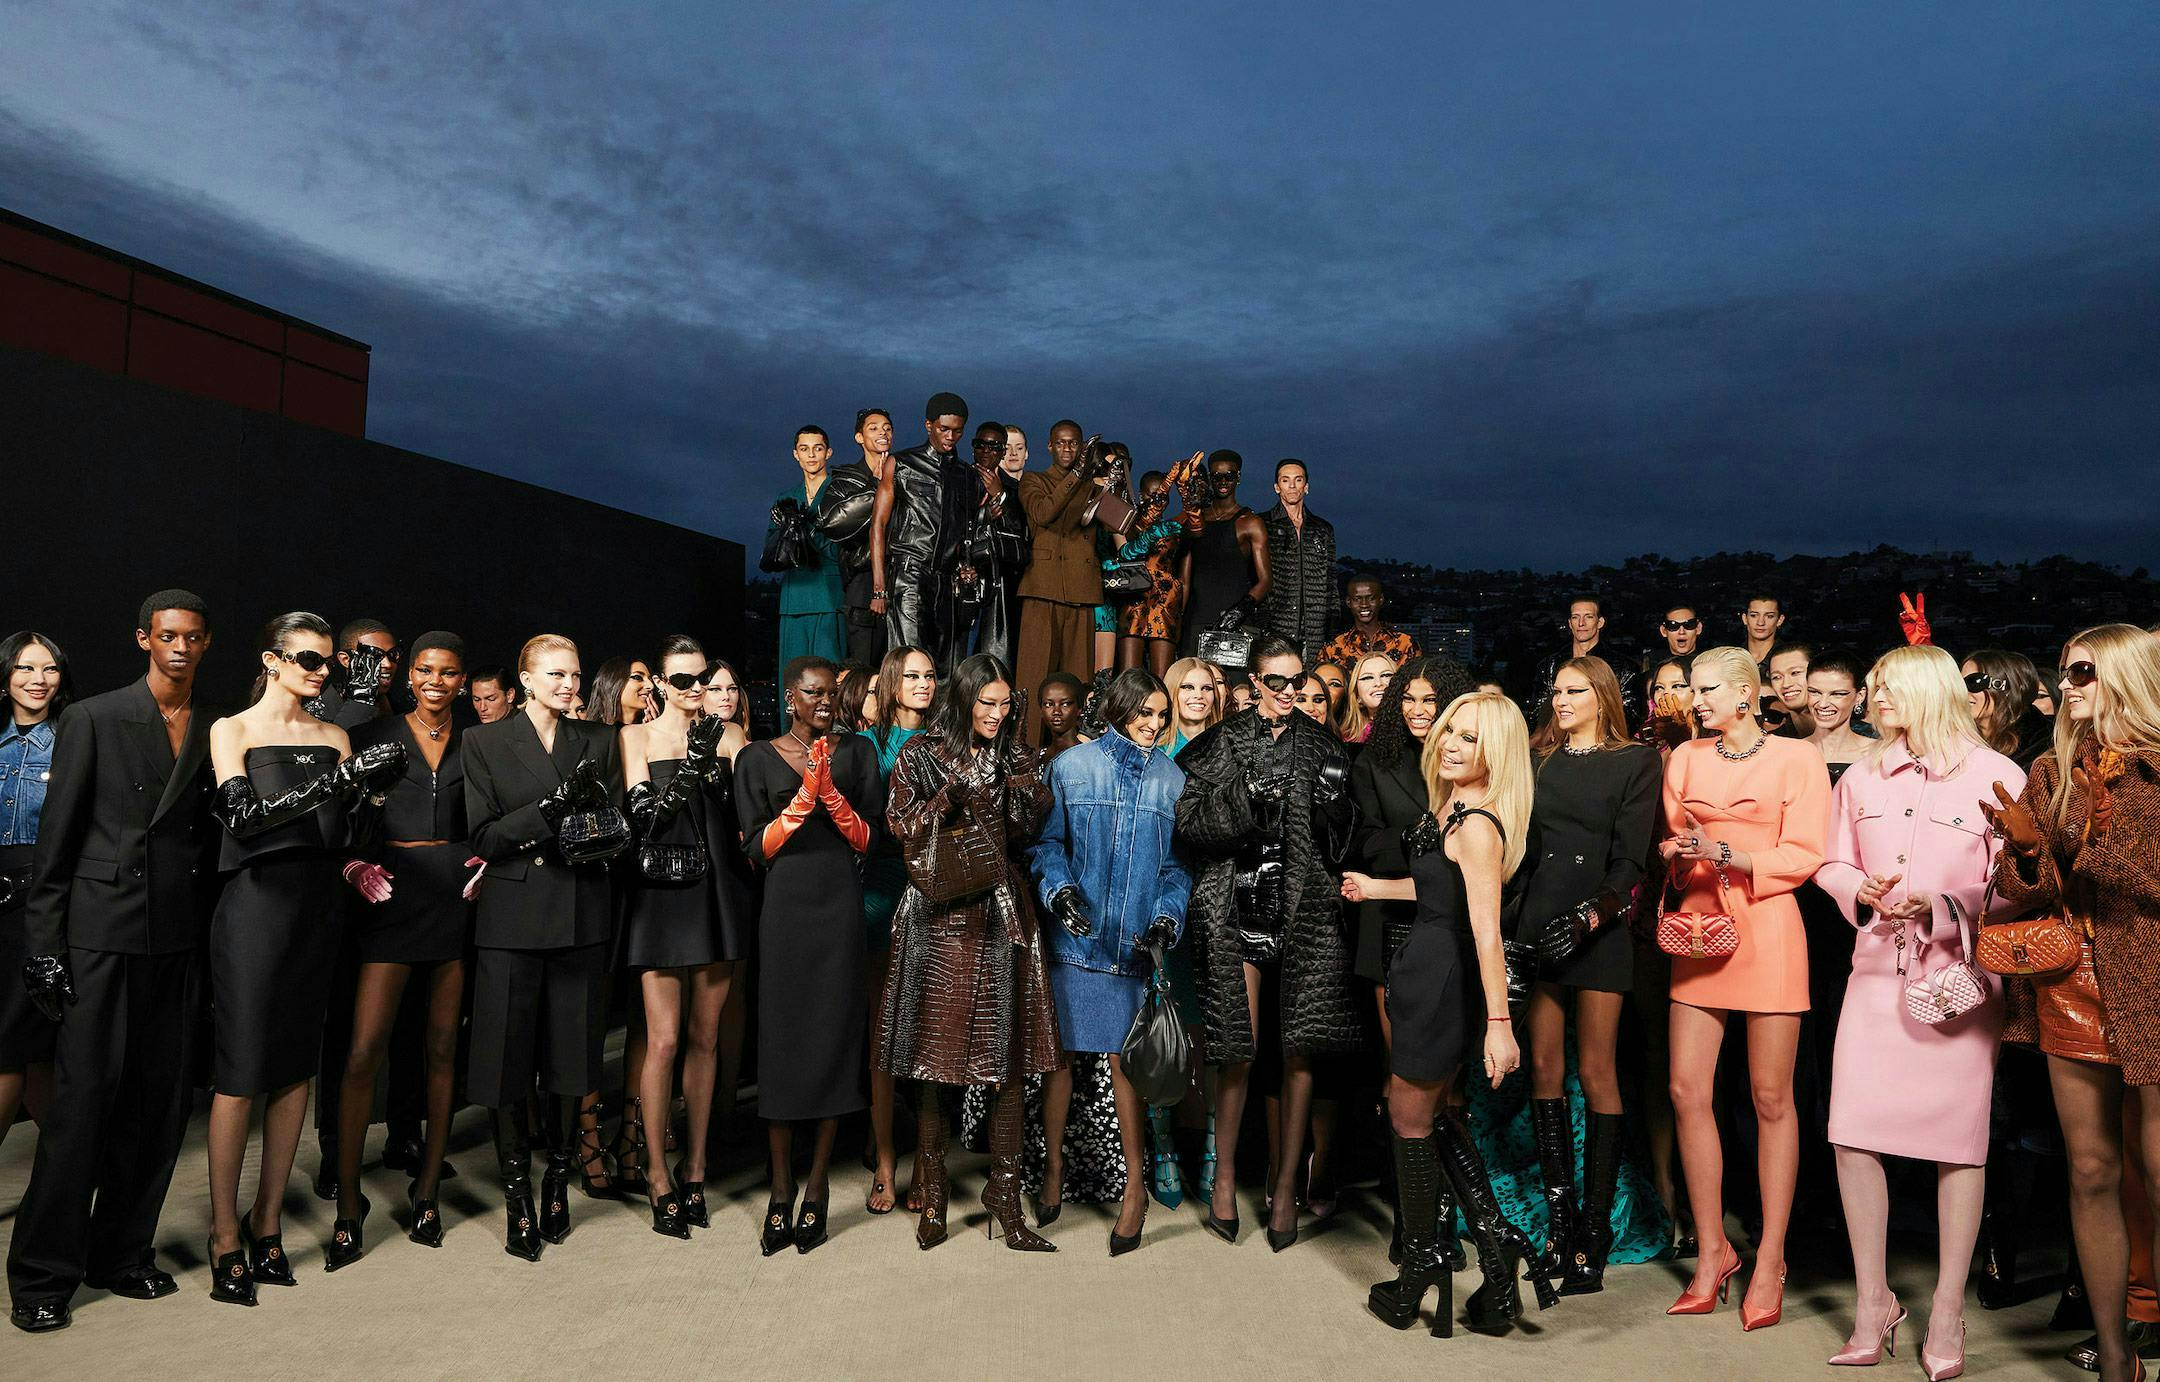 Donatella Versace after her LA Versace show with other celebrities.